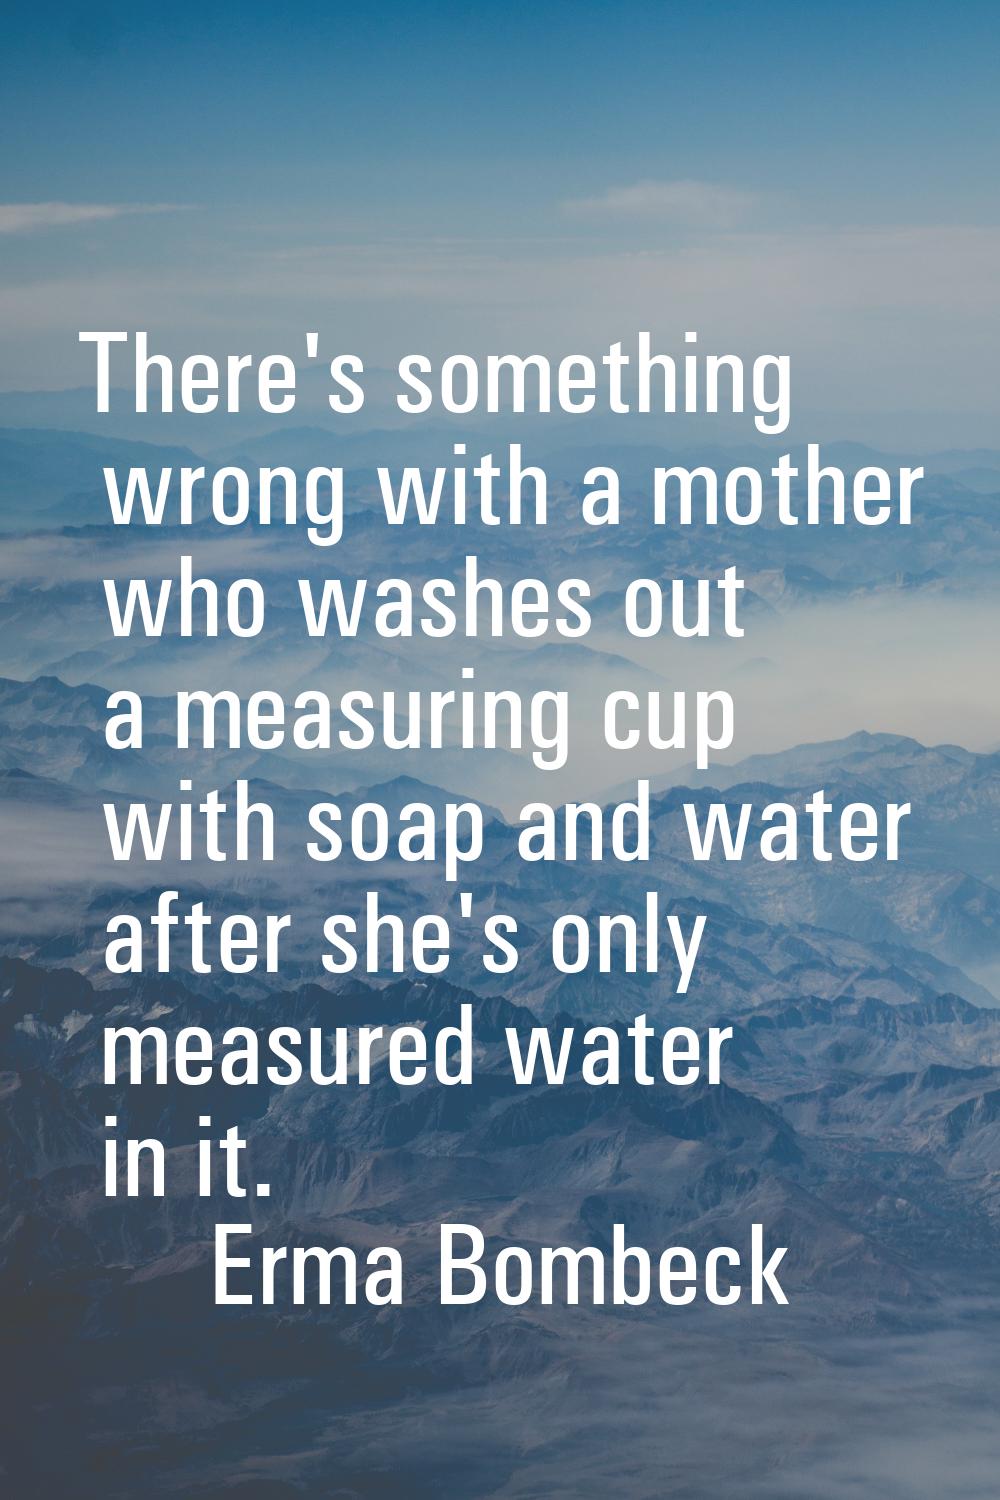 There's something wrong with a mother who washes out a measuring cup with soap and water after she'